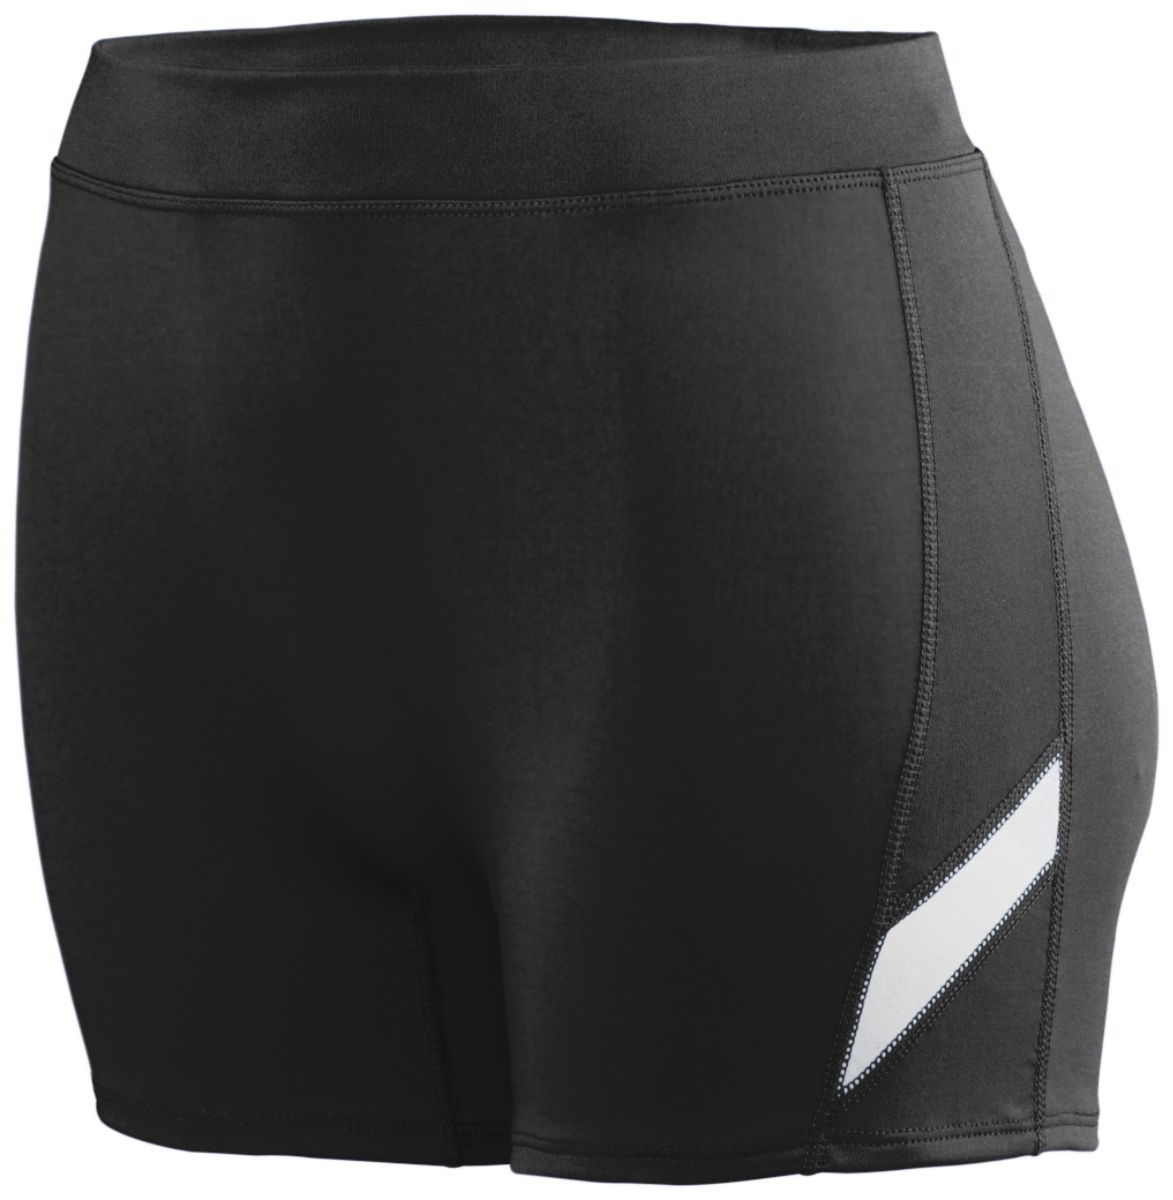 Augusta Sportswear Ladies Stride Shorts in Black/White  -Part of the Ladies, Ladies-Shorts, Augusta-Products, Volleyball product lines at KanaleyCreations.com